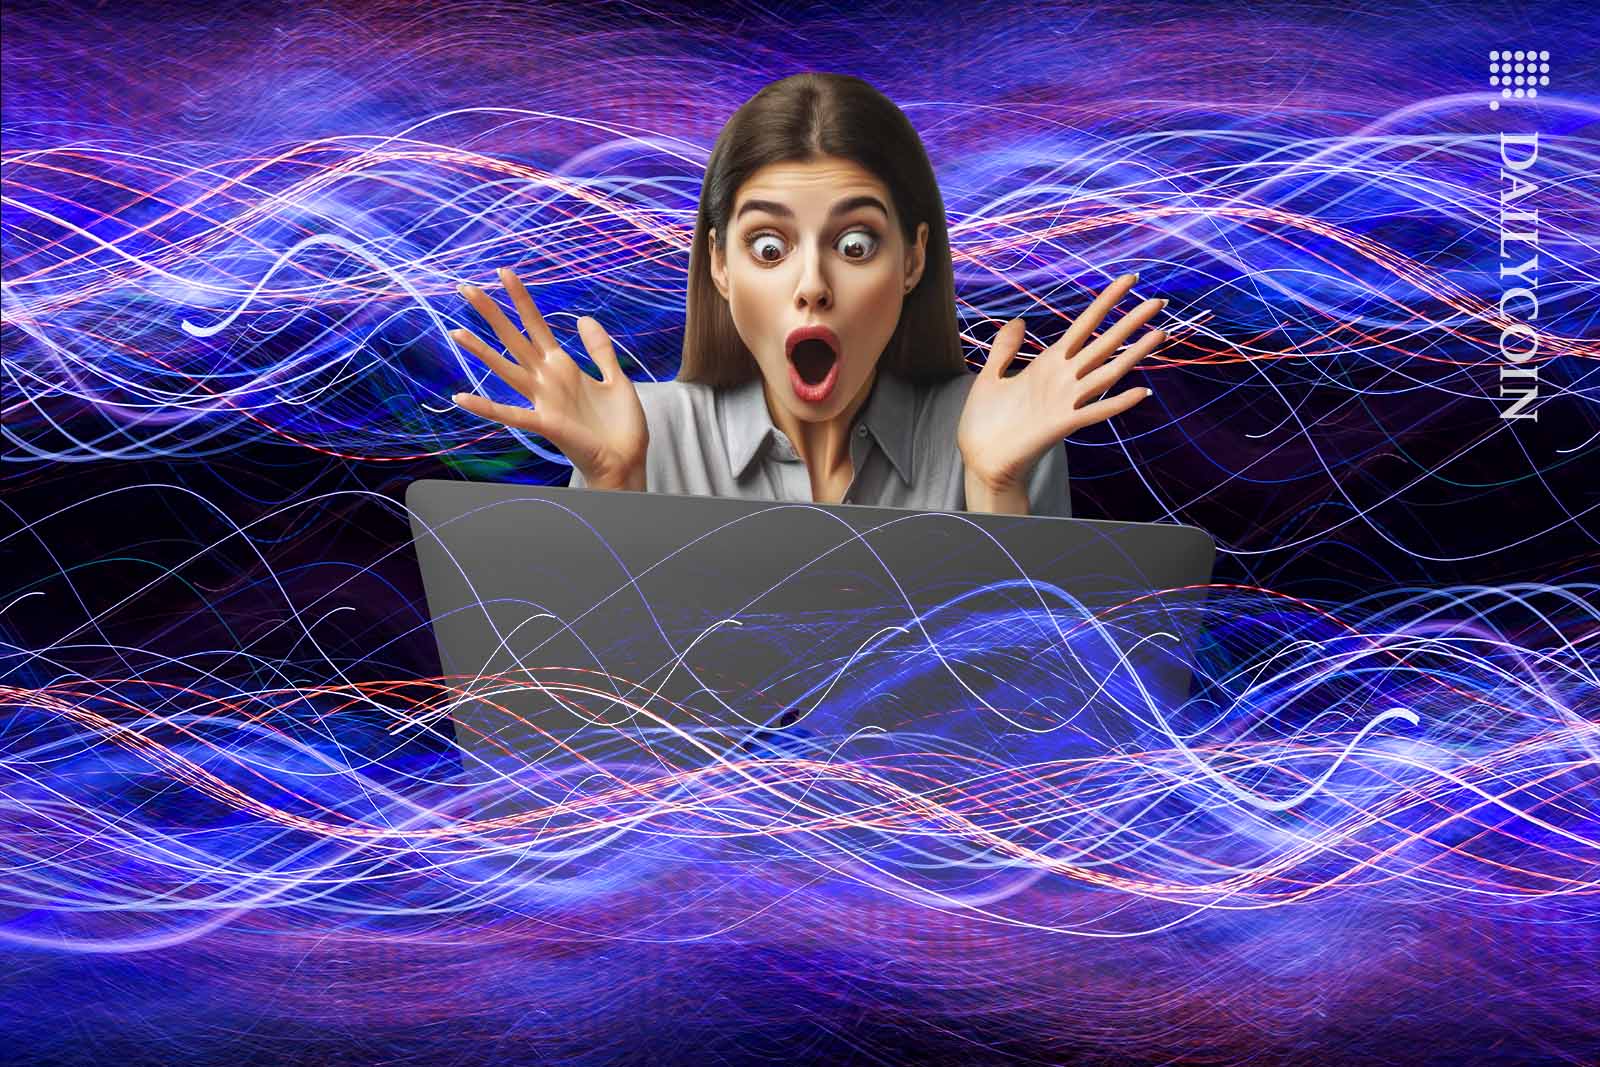 Woman looks extremly shocked about what she sees on the screen of her laptop.